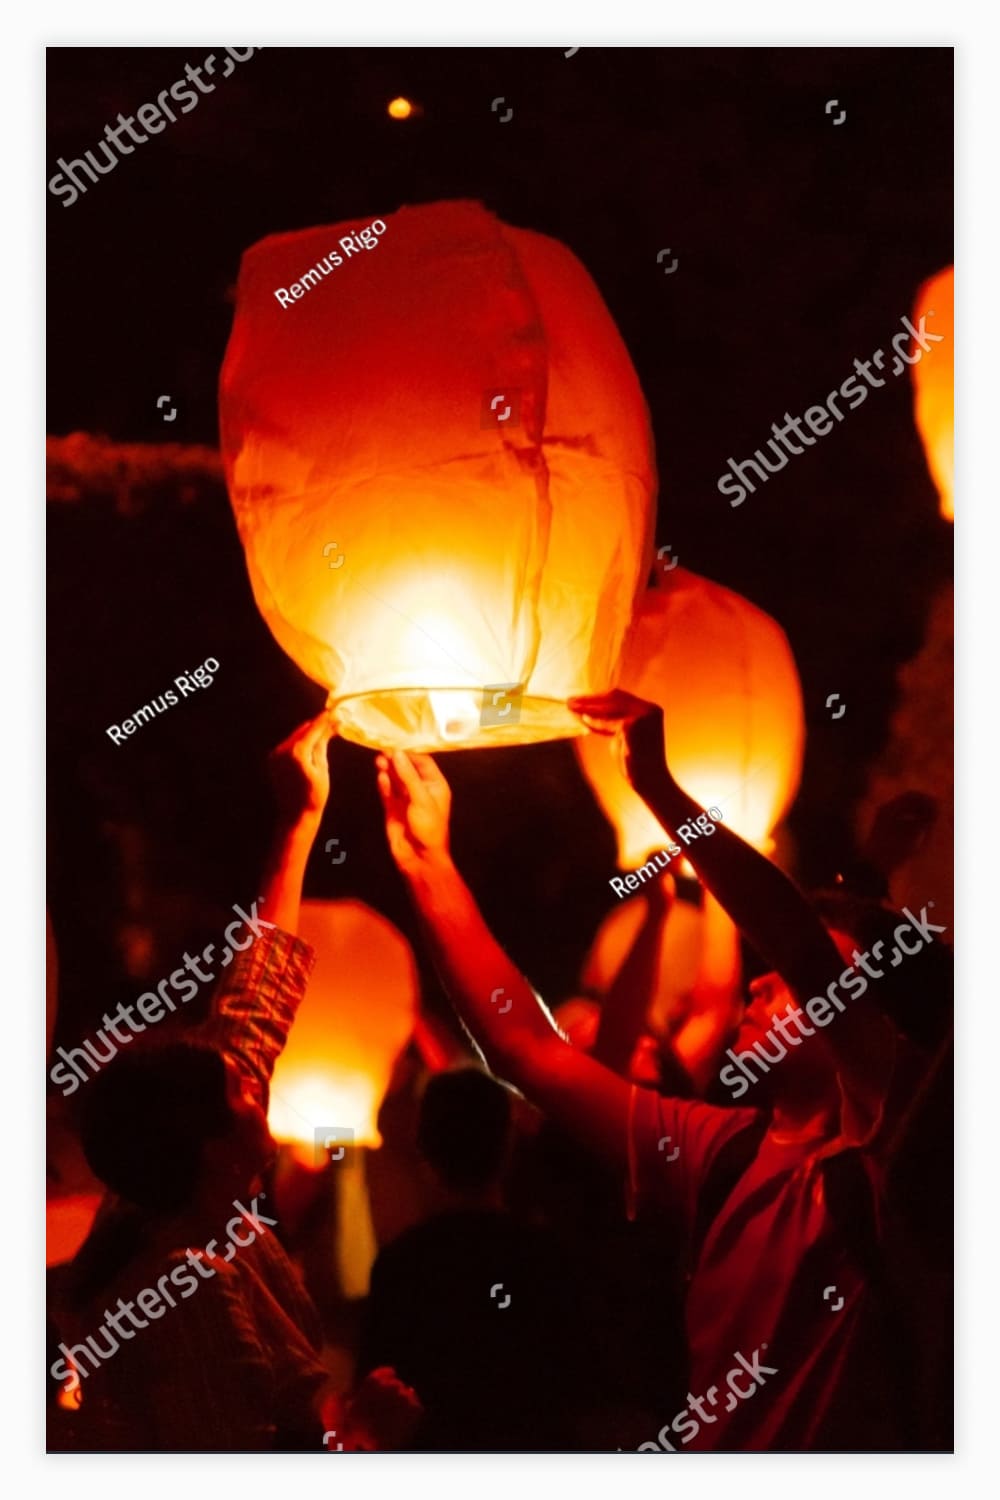 People launching flying lanterns at a festival.